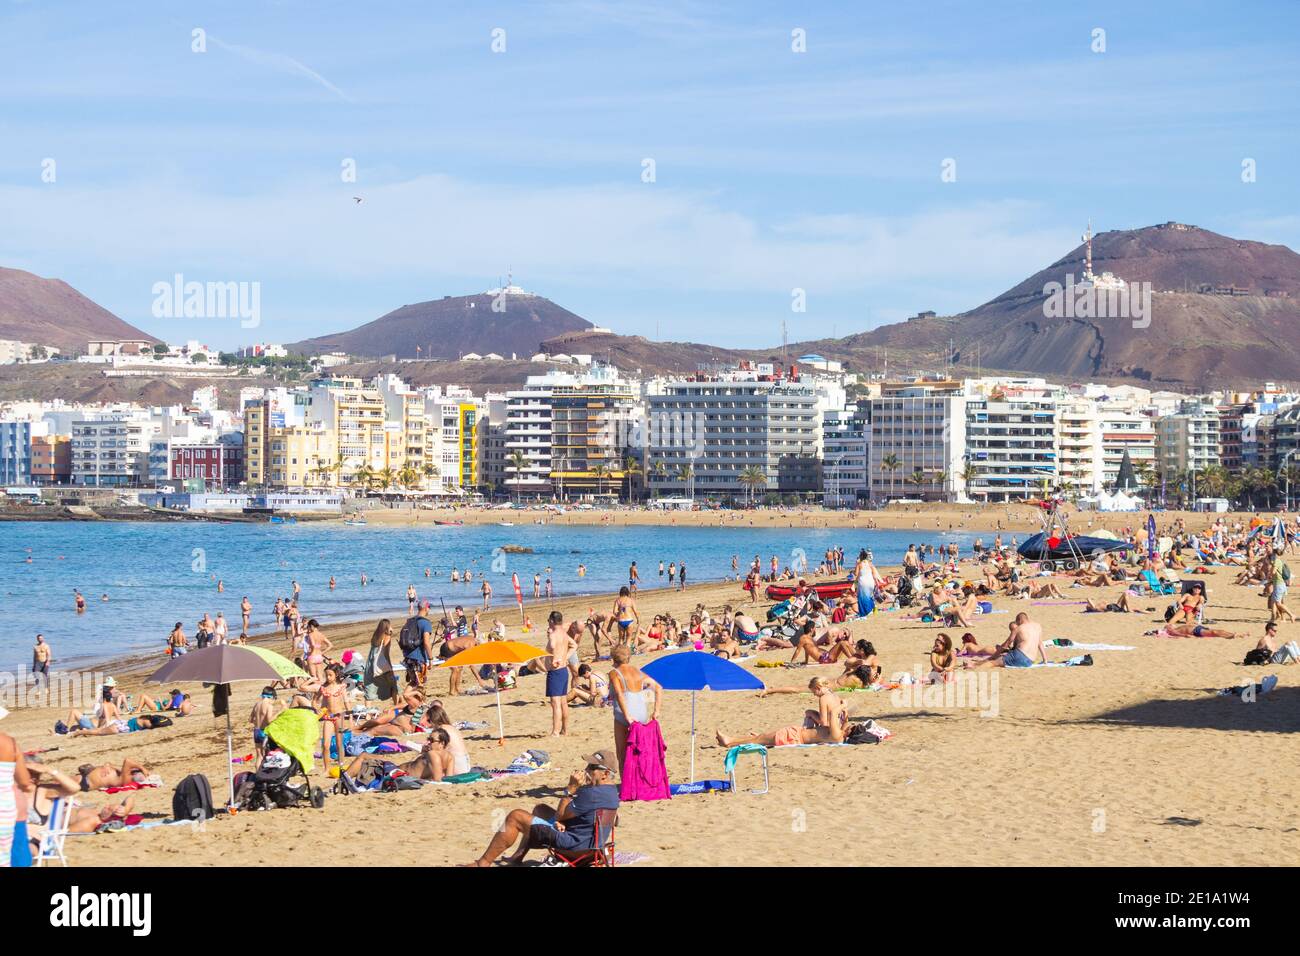 Las Palmas, Gran Canaria, Canary Islands, Spain. 5th January 2021. Tourists  lucky enough to have travelled before the Tier 4 and new lockdown travel  restrictions, bask in glorious sunshine on the city